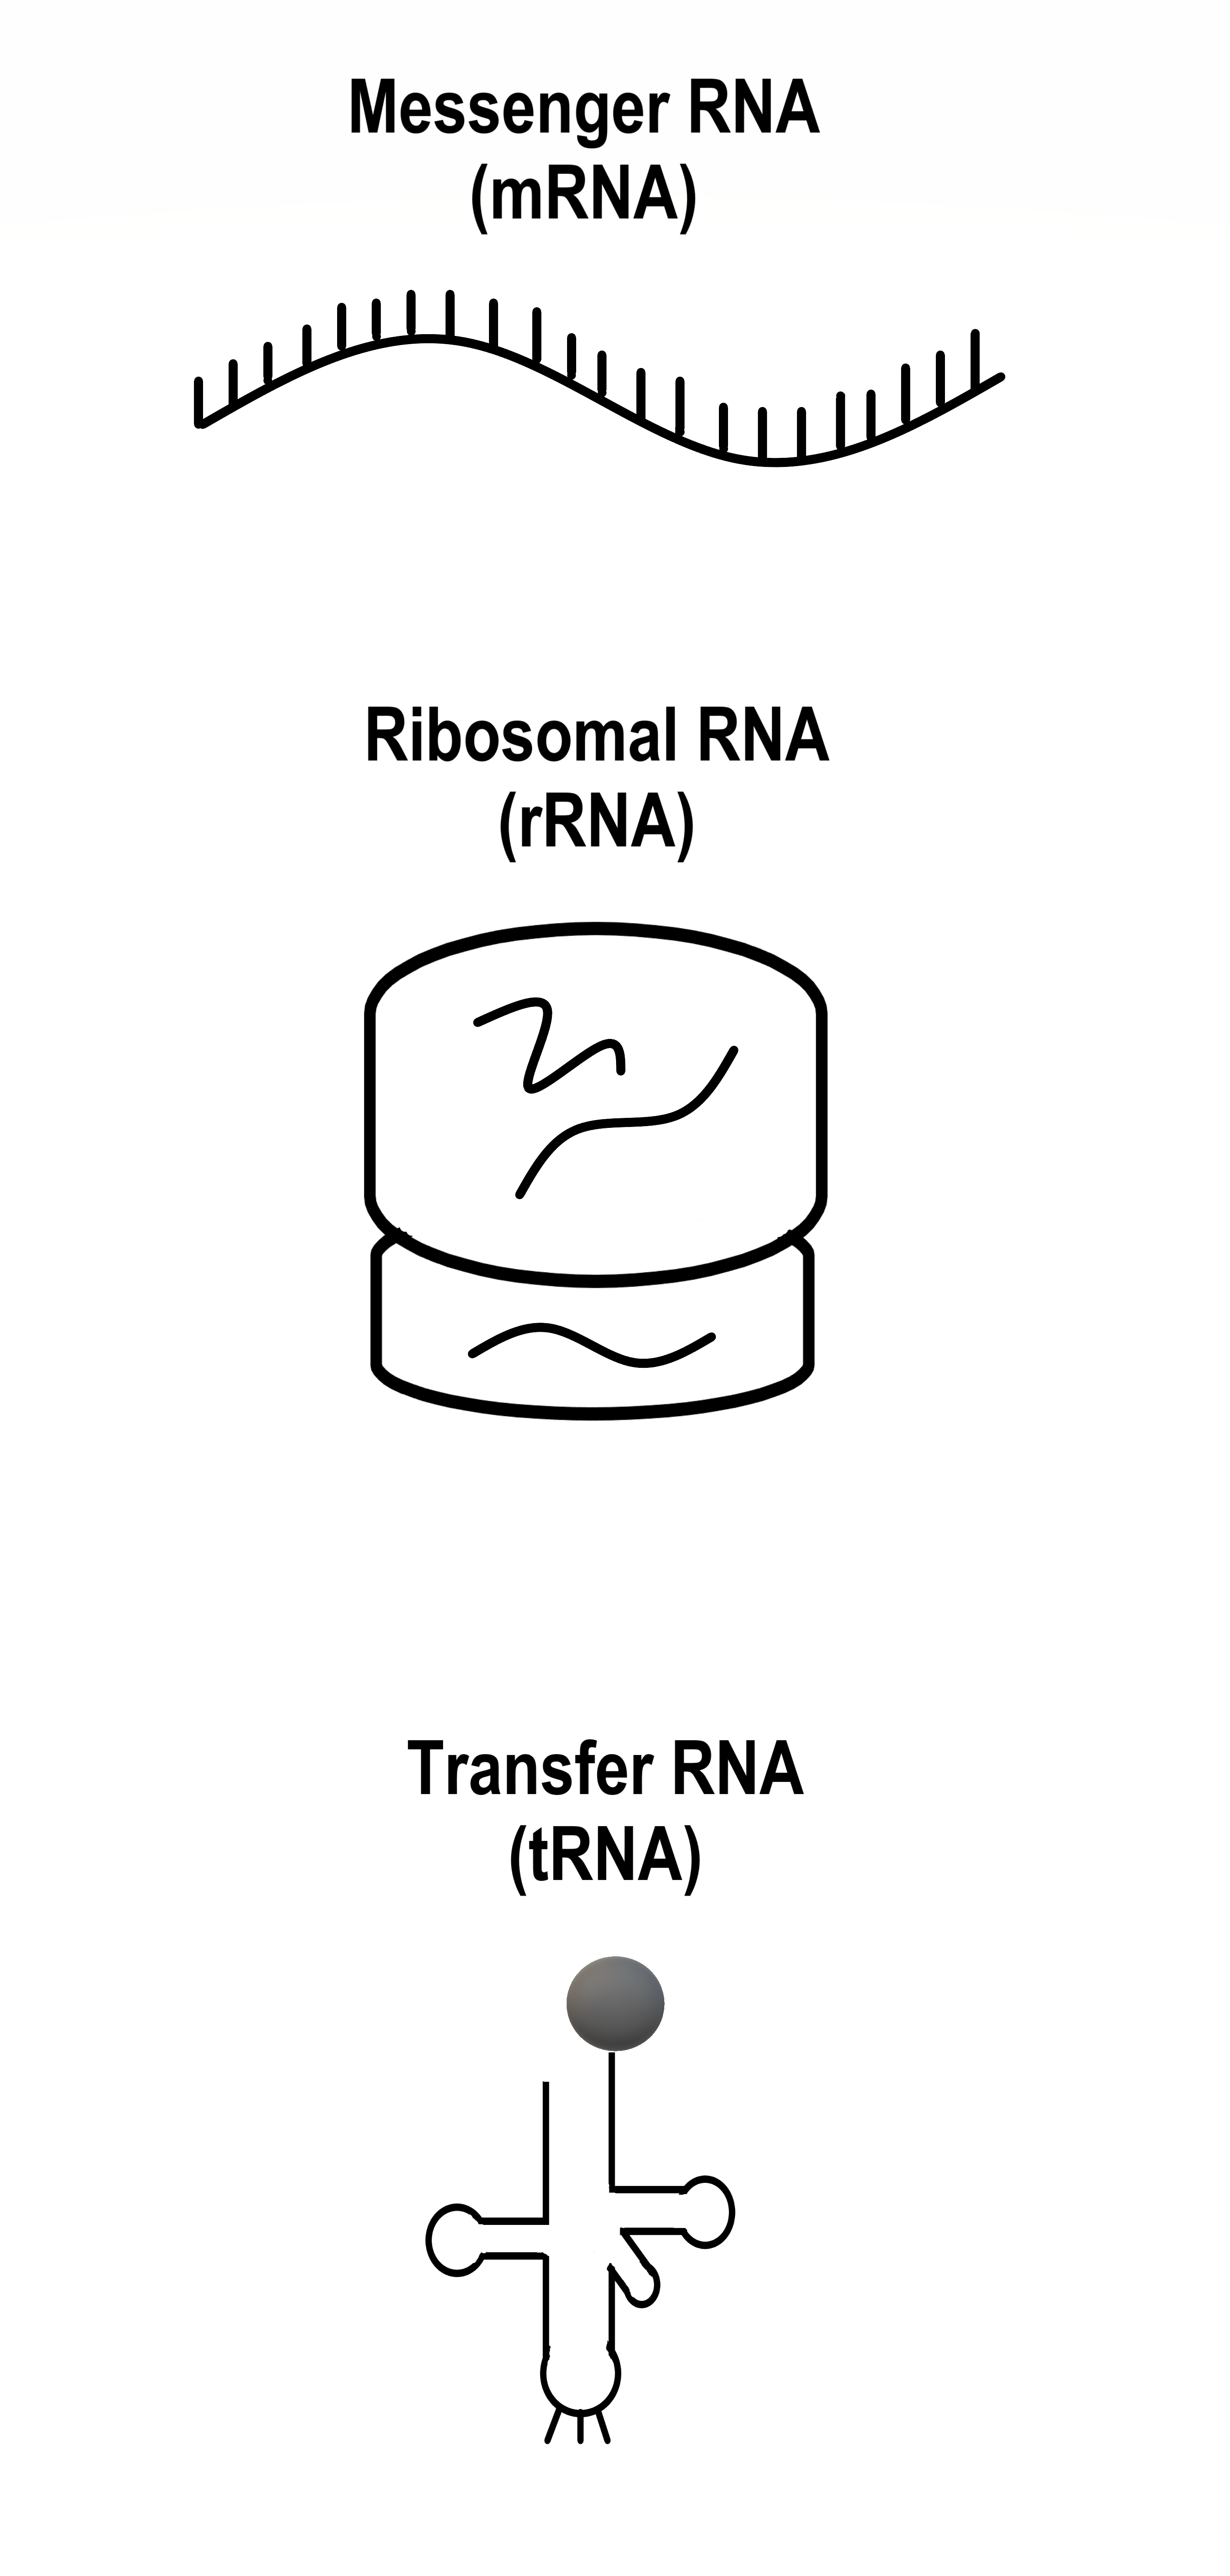 Image shows a diagram of the three types of RNA: Messenger RNA, which is a single strand of RNA, Ribosomal RNA, which is an RNA-protein complex with two subunits, and transfer RNA, which is a single strand of RNA enfolded on itself with an anticodon region and a region which can carry a single amino acid.